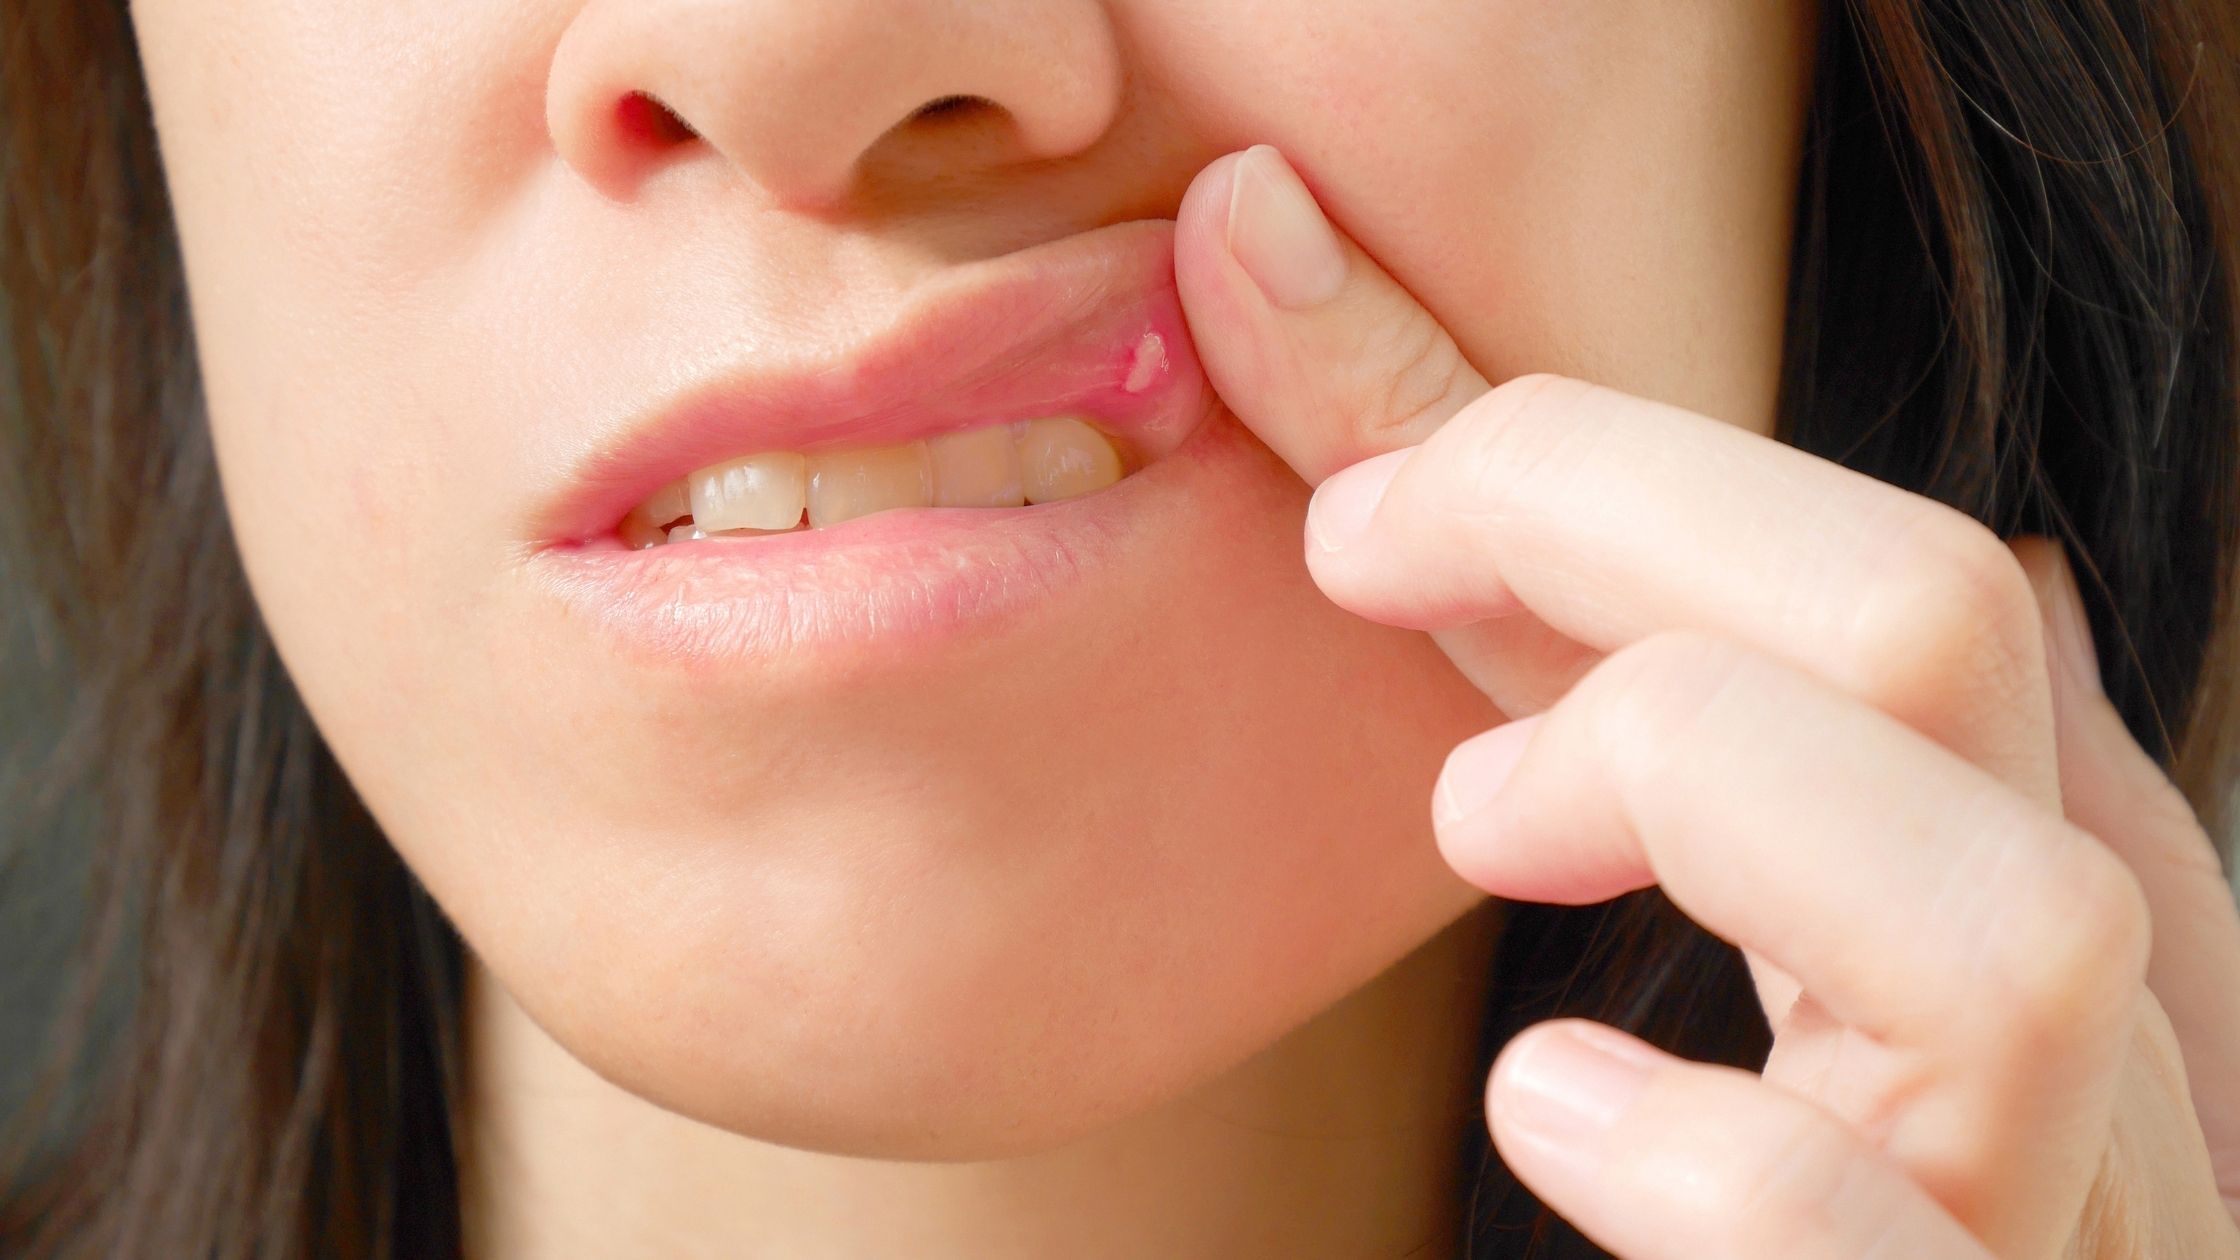 Canker Sore Causes